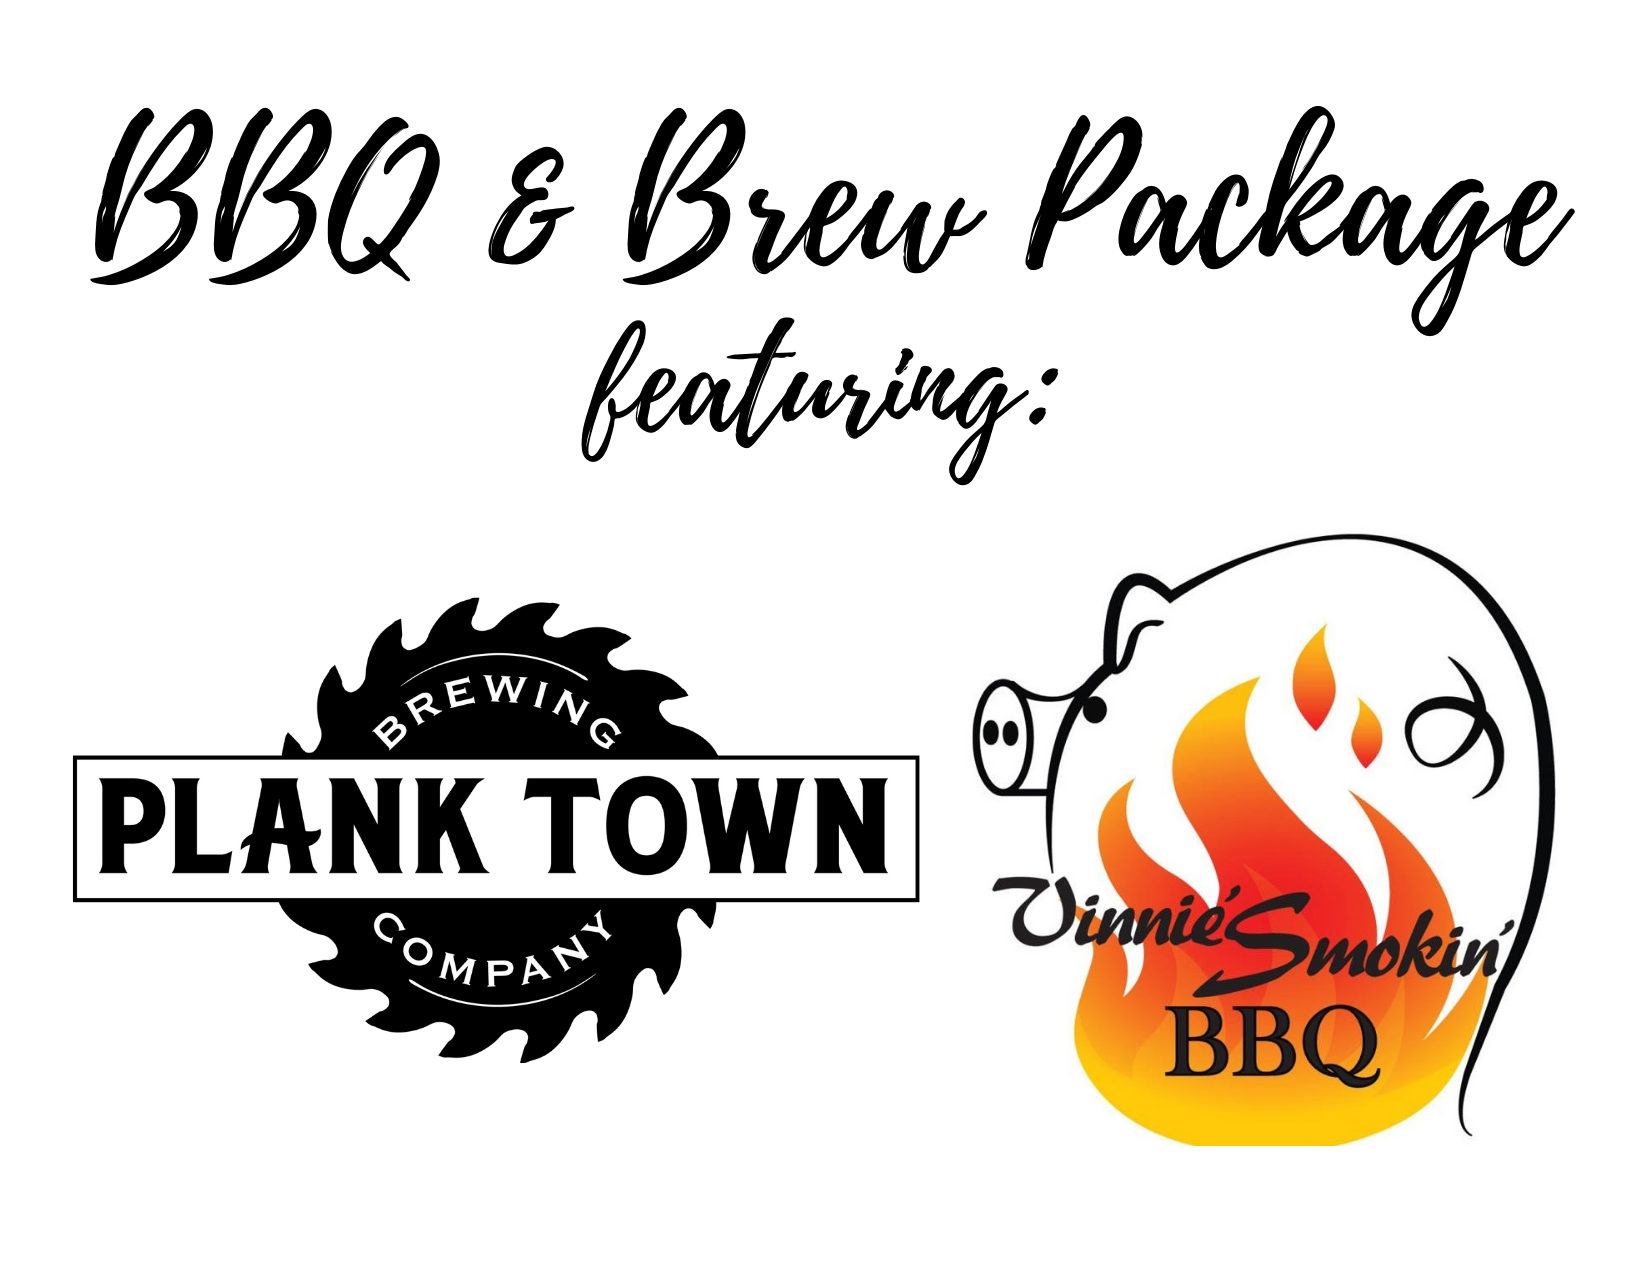 BBQ & Brew Package